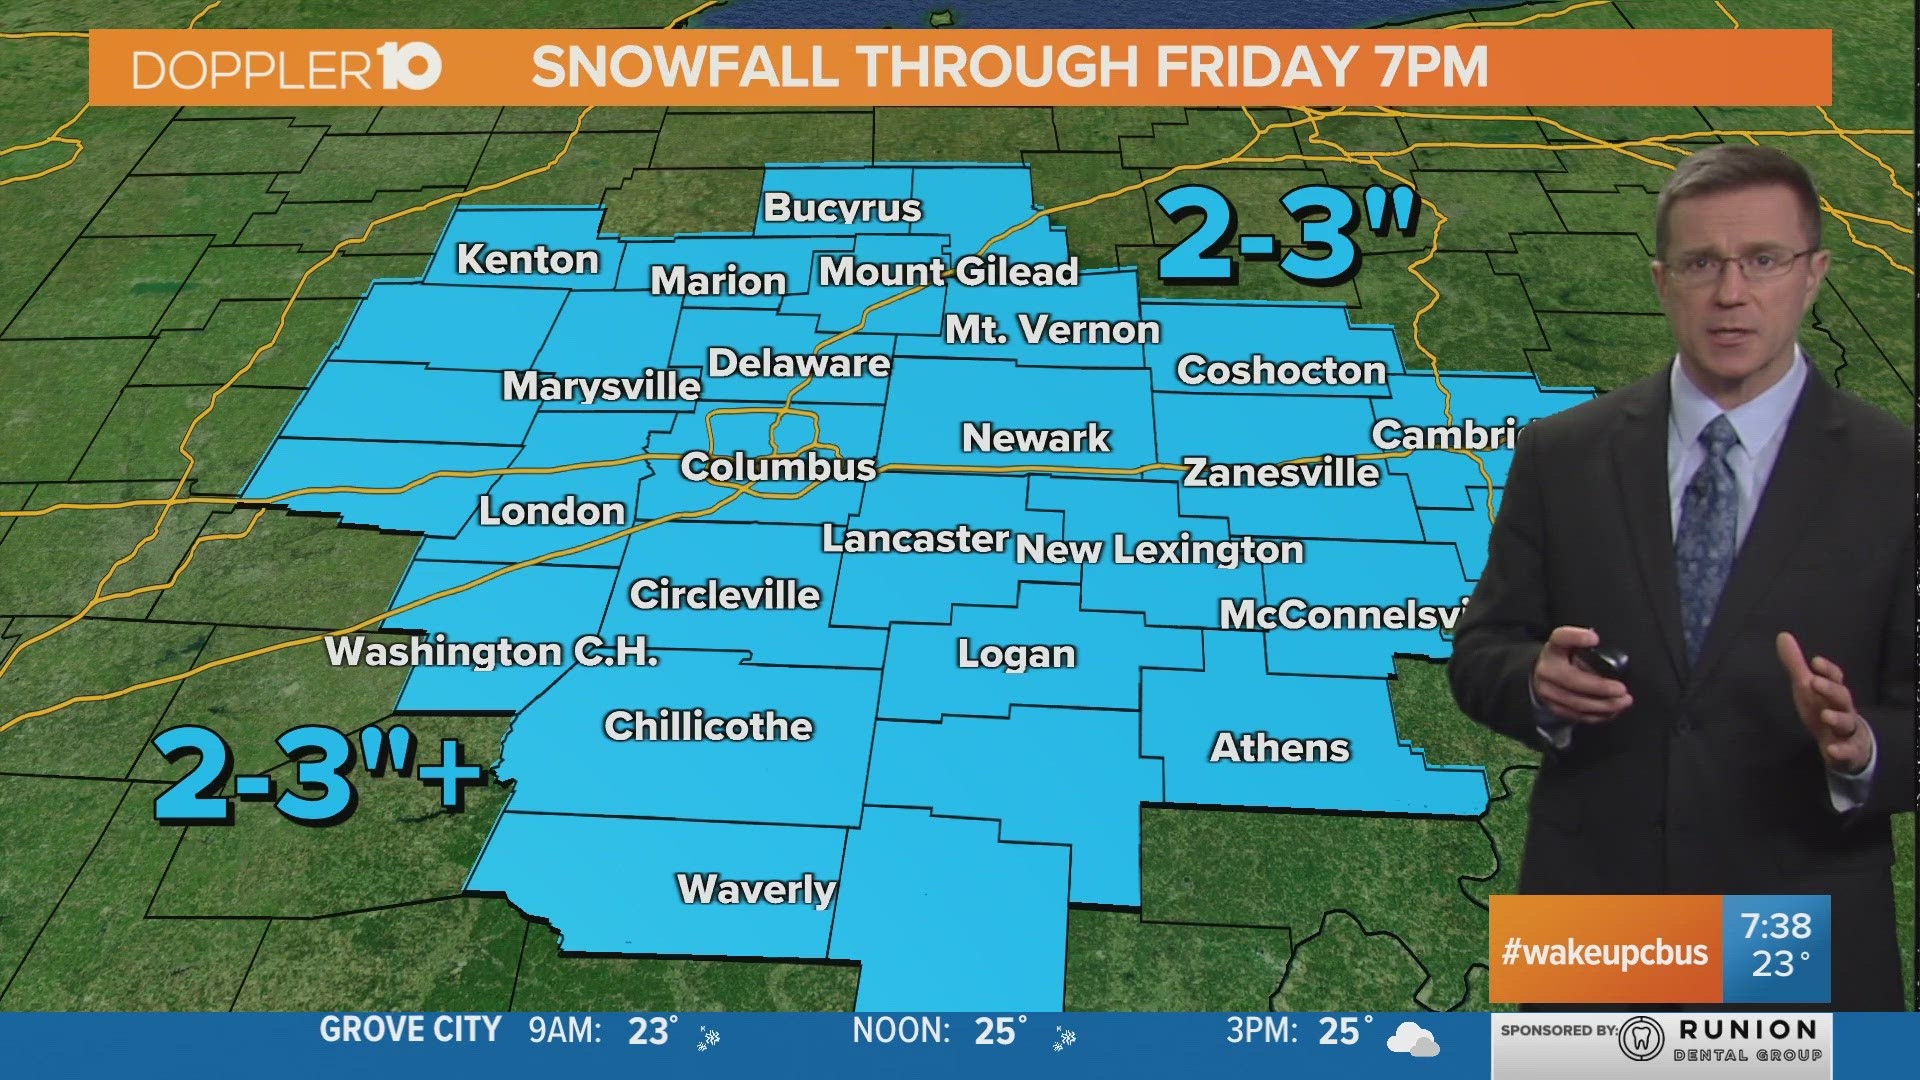 Most parts of central Ohio have about 1 to 2 inches of snow as of Friday morning.